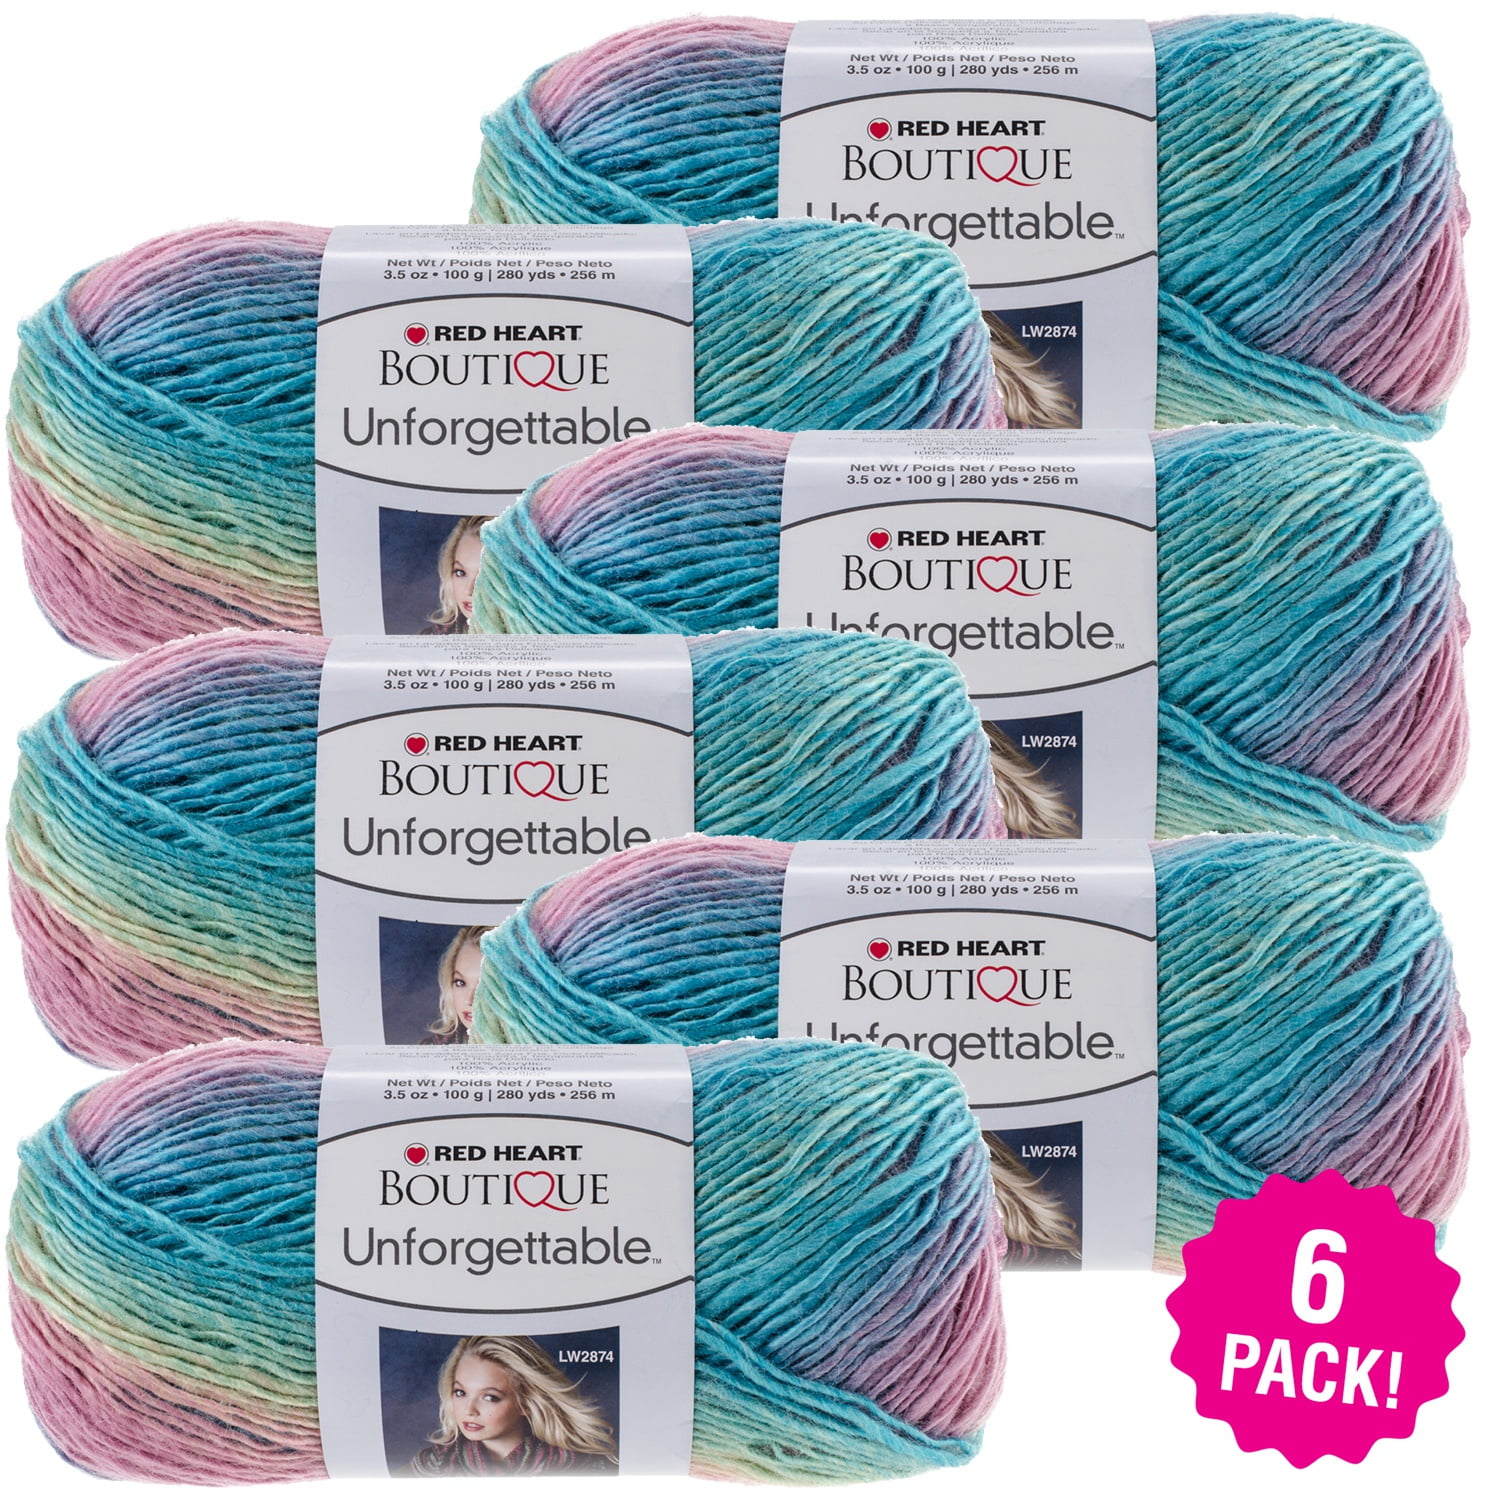 Red Heart Boutique Yarn Candied, Multipack of 6